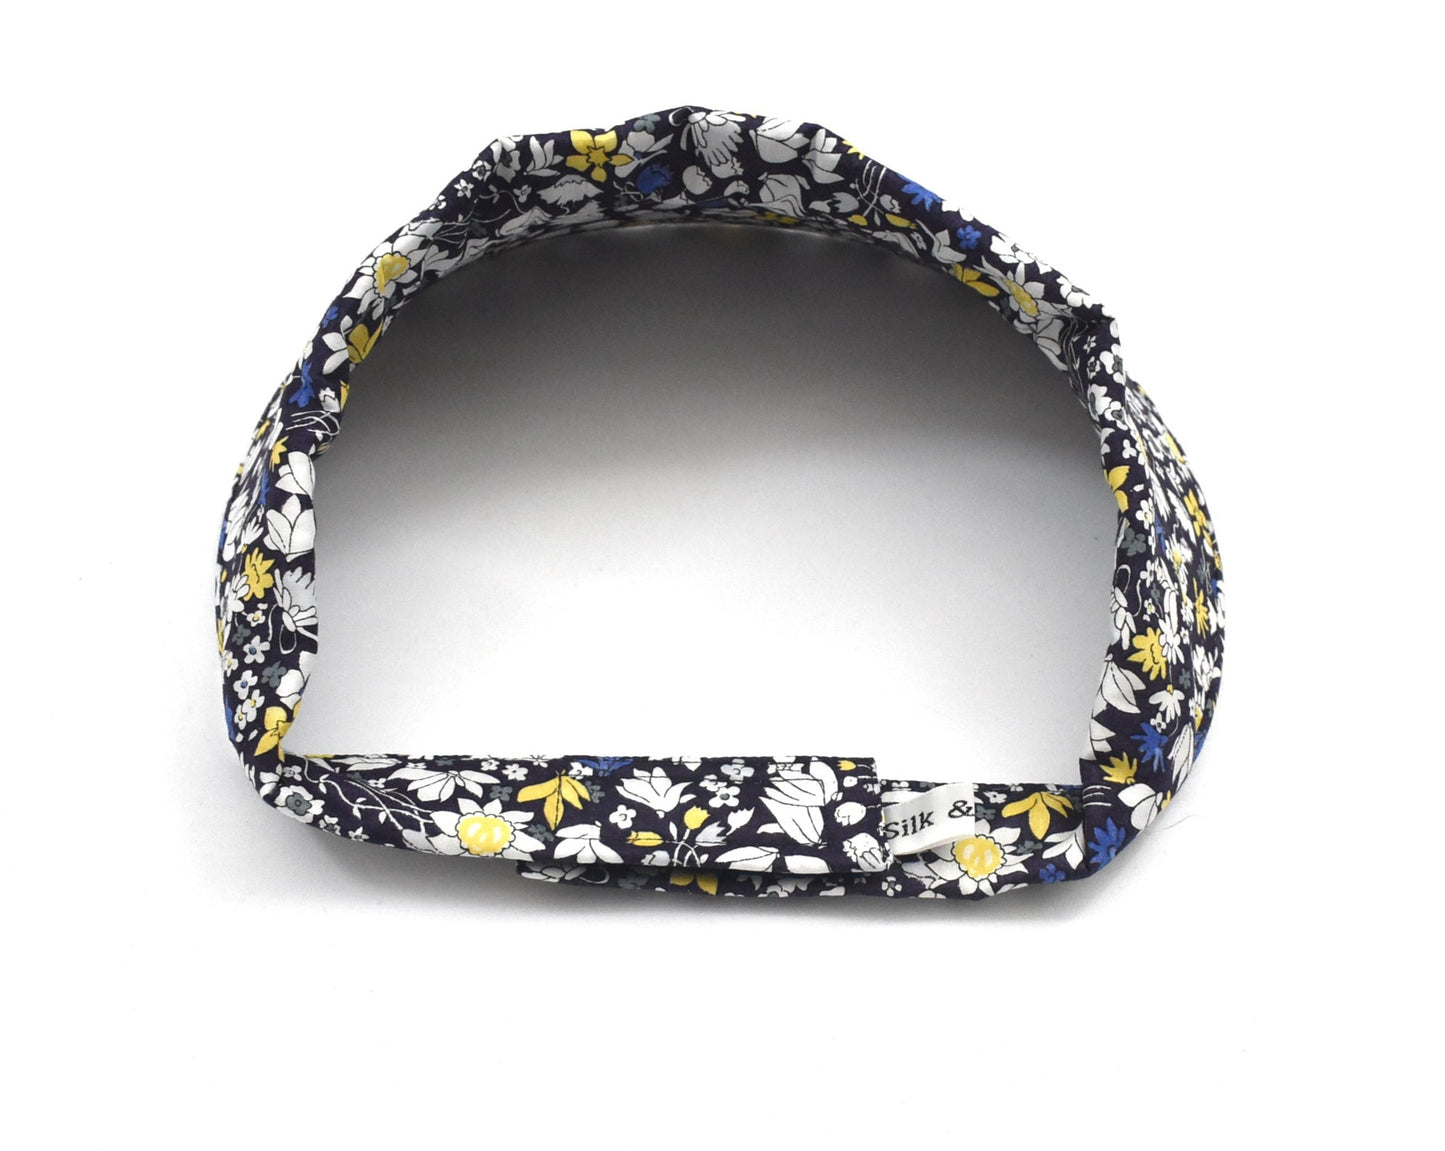 Sun Visor in Liberty of London Yellow and Navy Blue Floral print